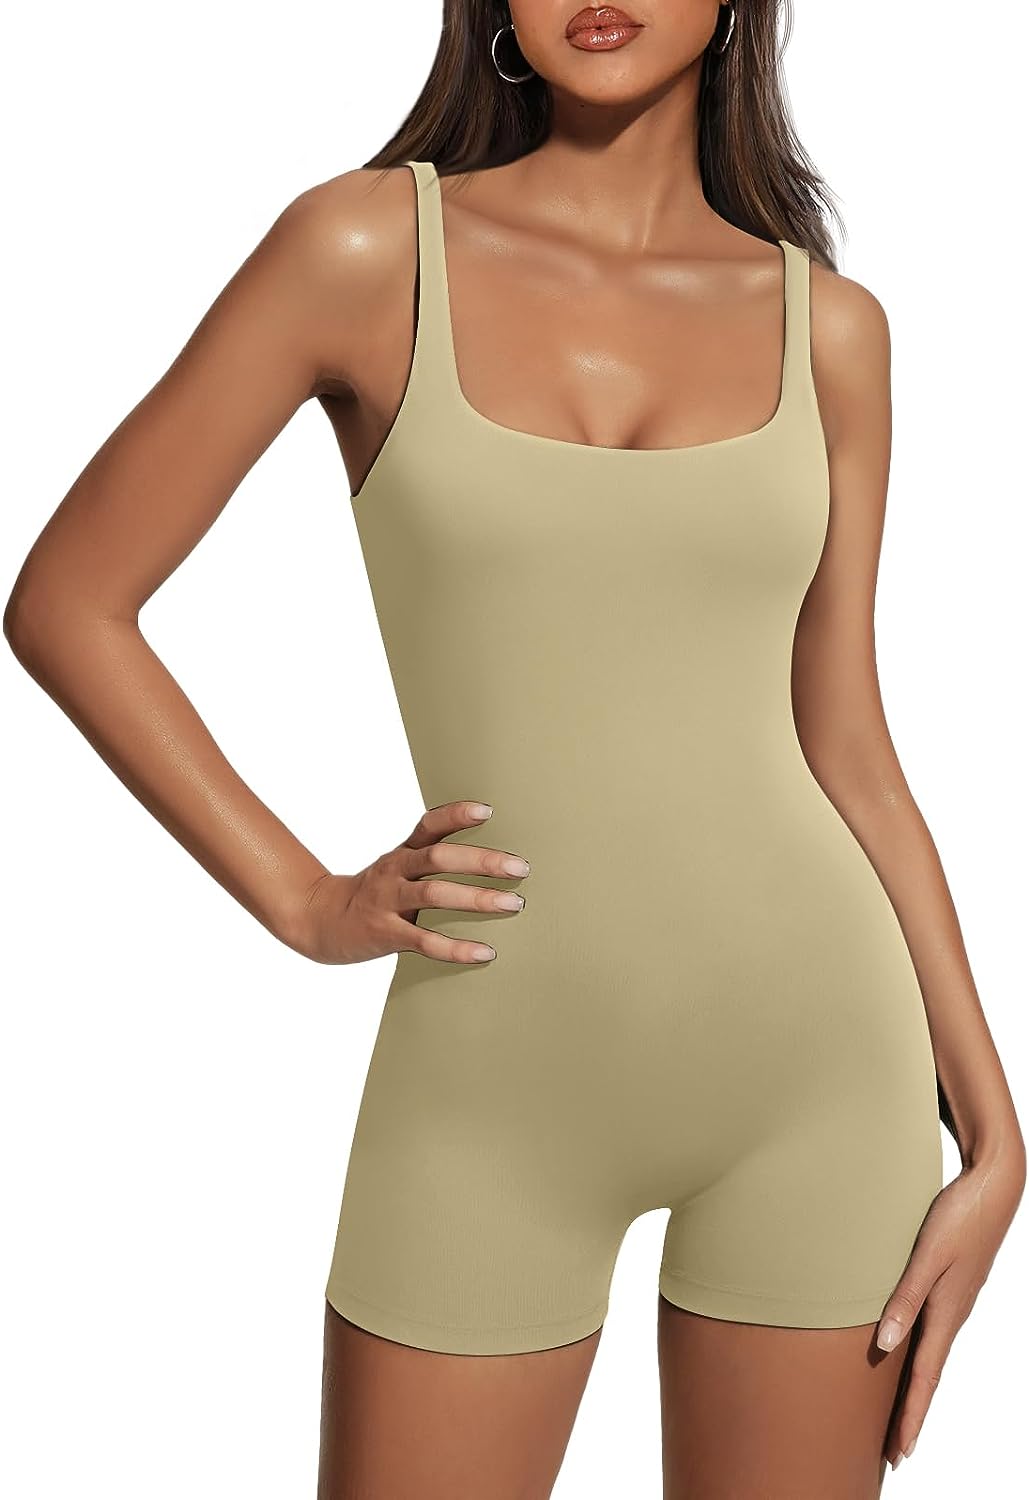  OMKAGI Women Seamless One Piece Jumpsuits Racerback Bodycon Tummy  Control Yoga Rompers